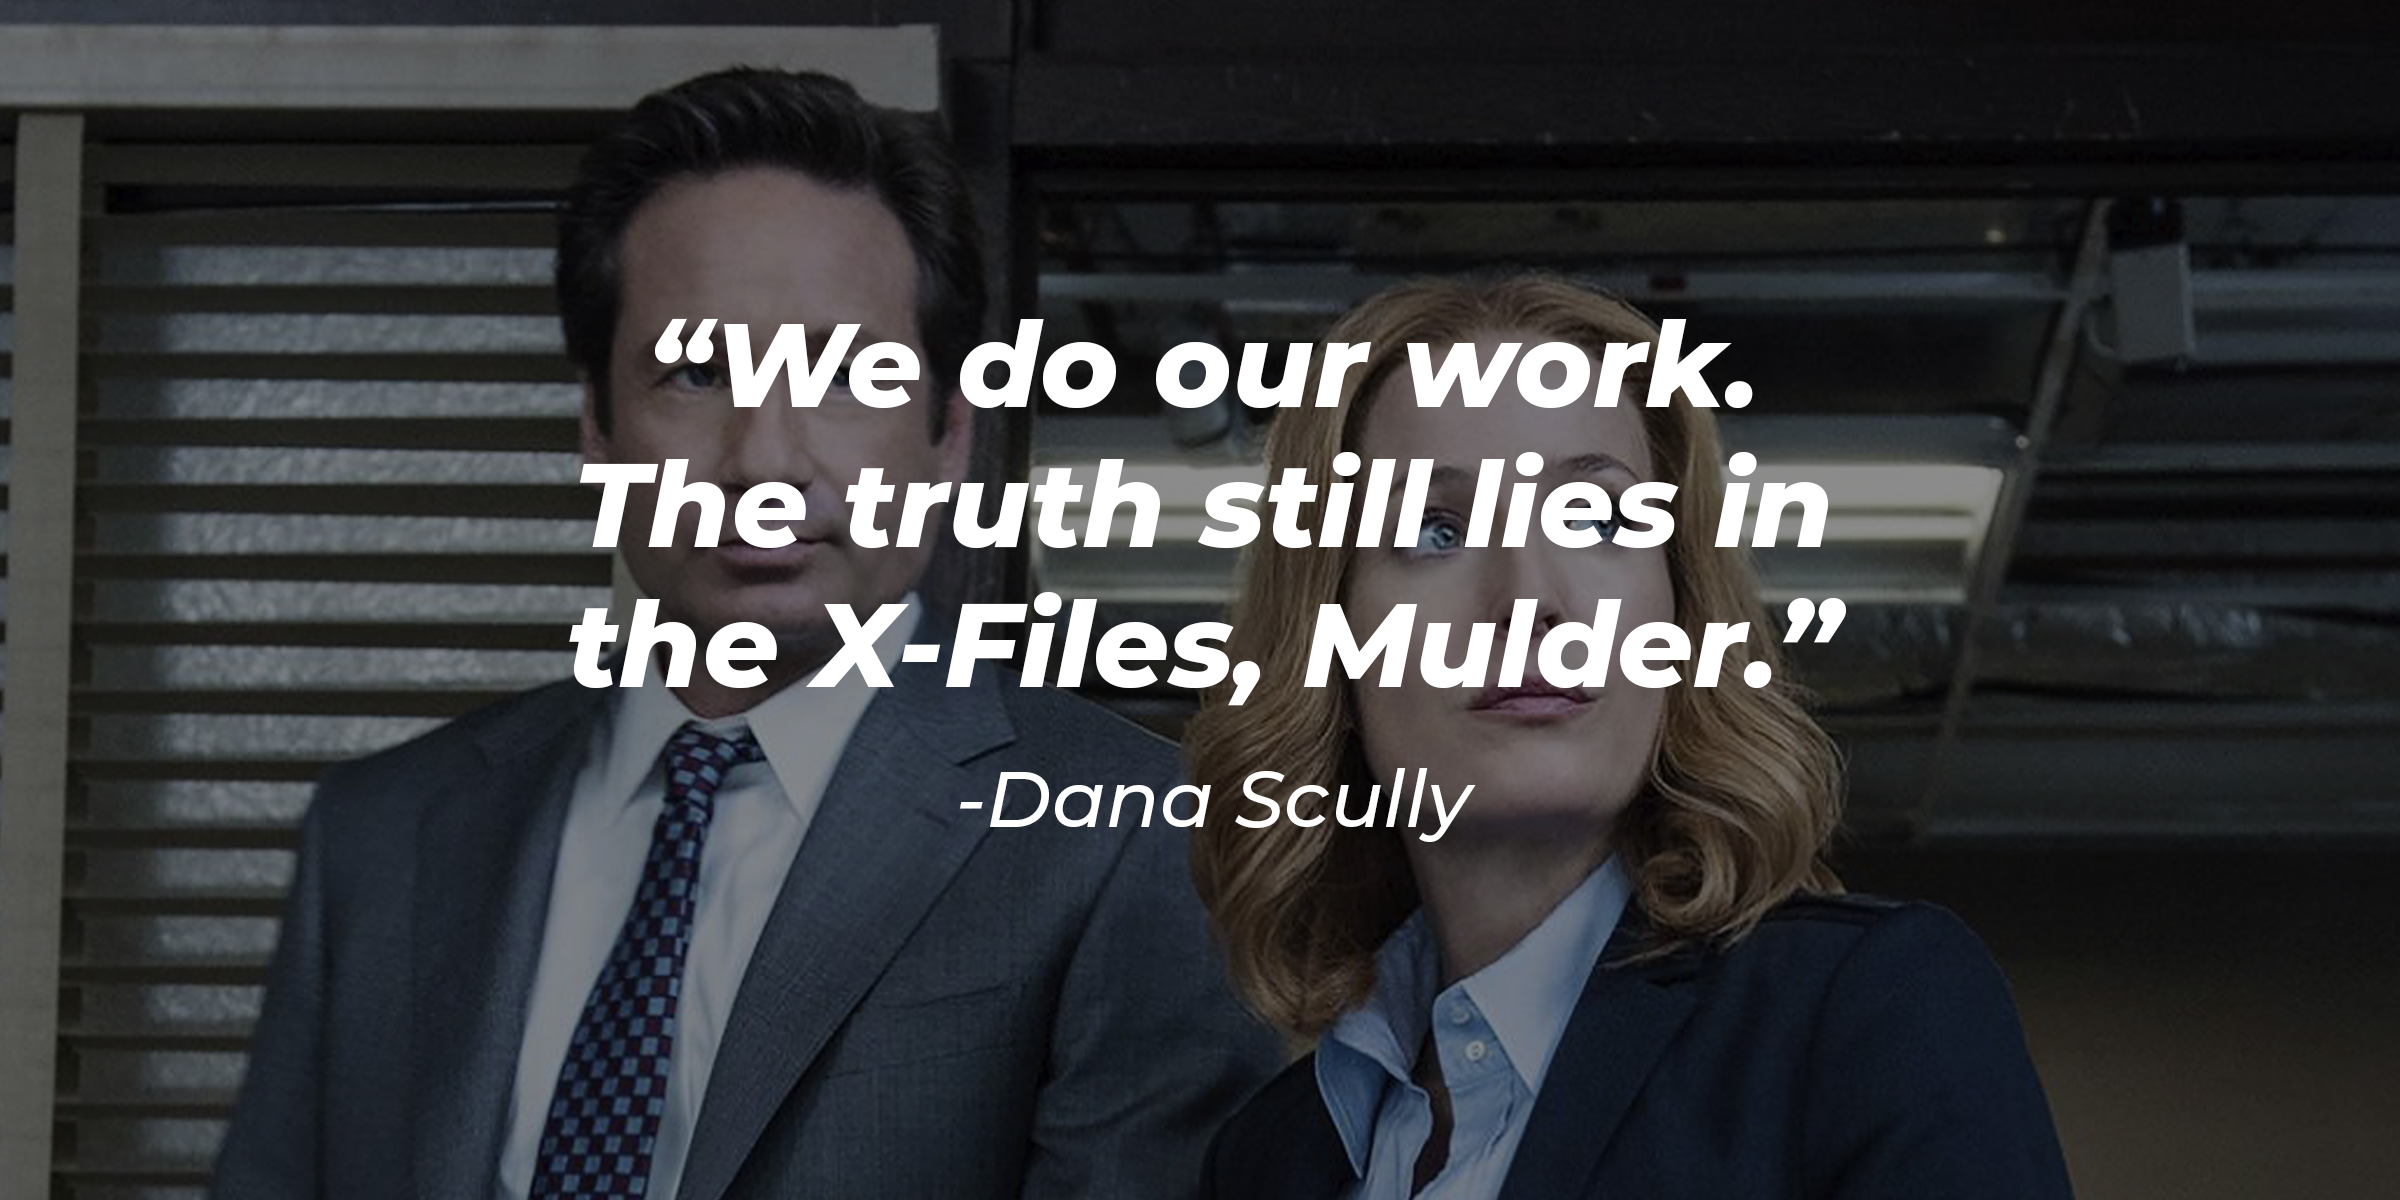 An image of Dana Scully with her quote: "We do our work. The truth still lies in the X-Files, Mulder." | Source: Facebook.com/OfficialTheXFiles